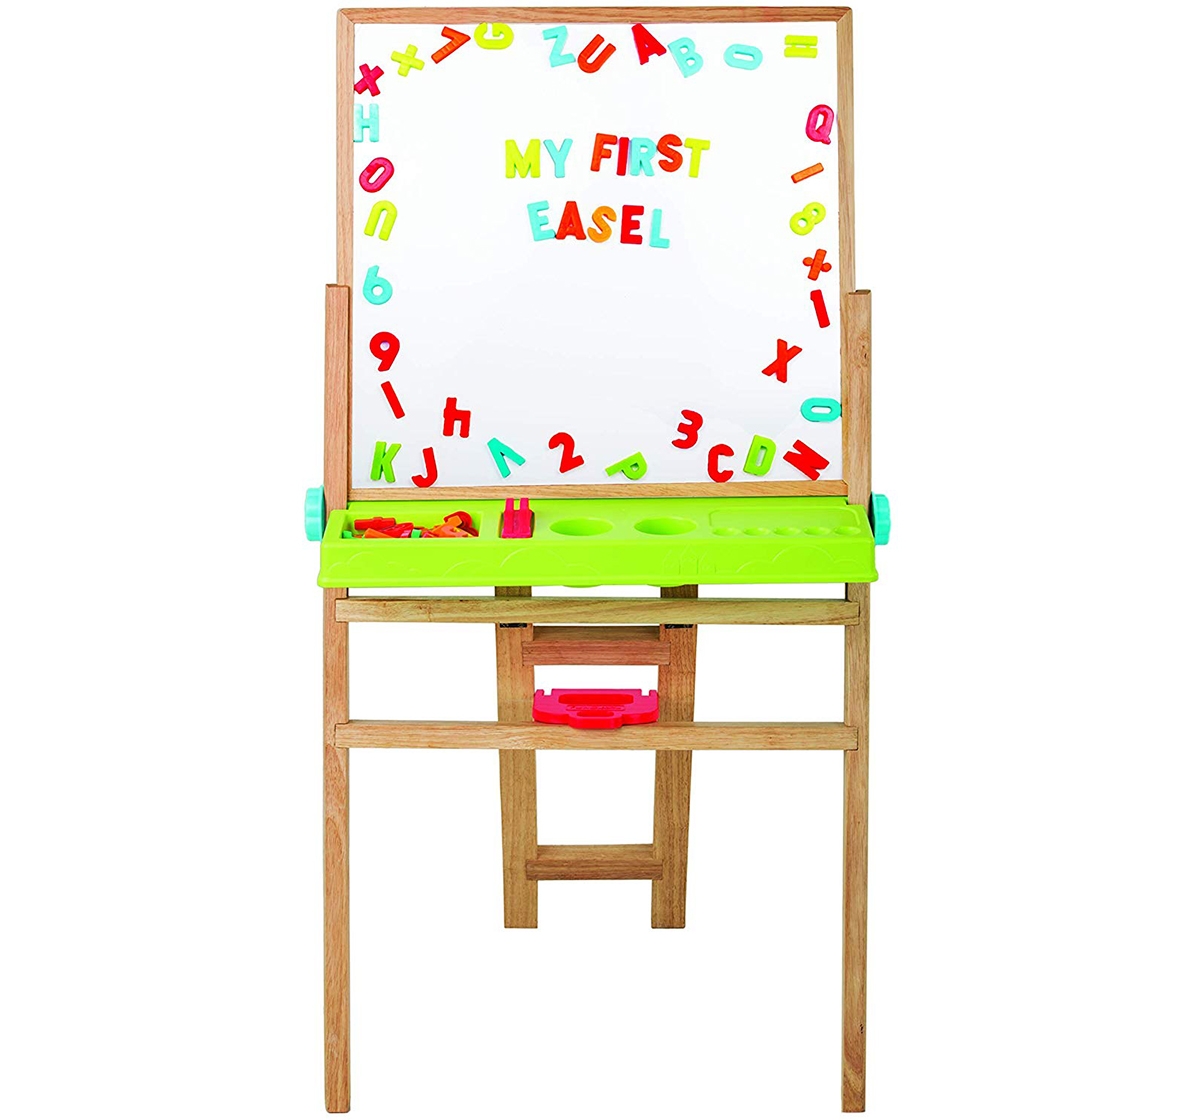 Giggles | Giggles My First New Easel - Brown Activity Table & Boards for Kids age 3Y+ (Brown) 2